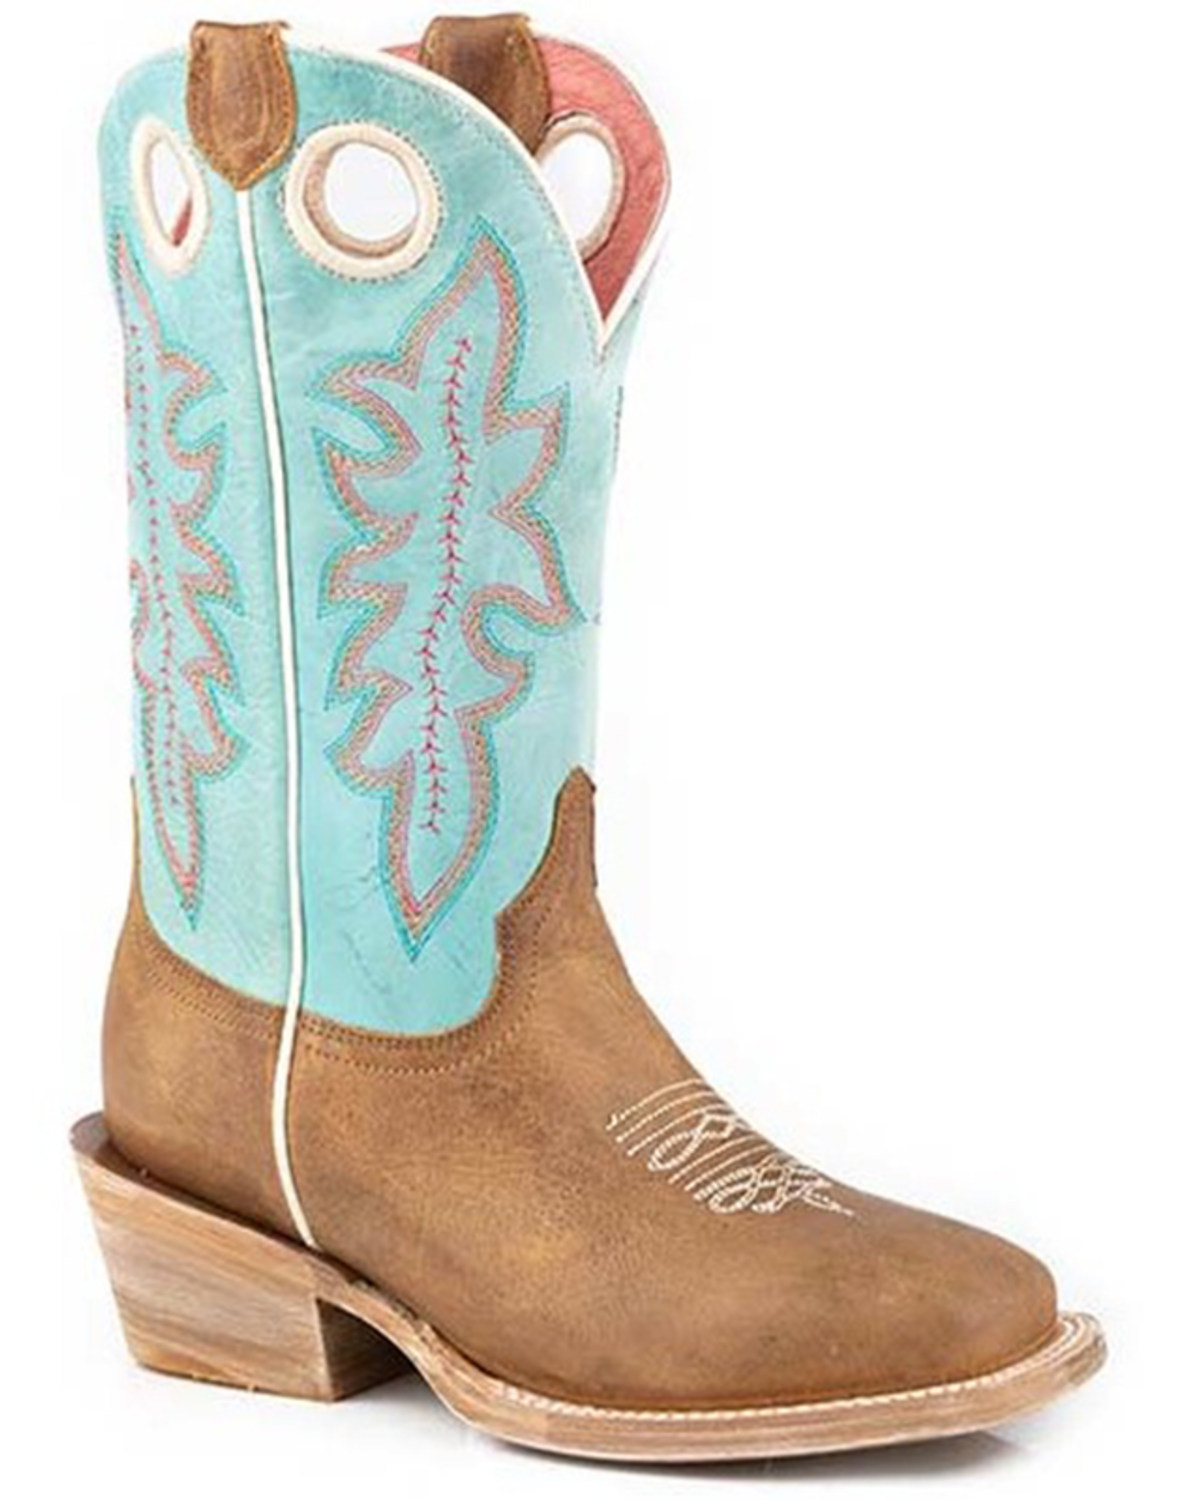 Roper Little Girls' Ride Em' Cowgirl Western Boots - Square Toe